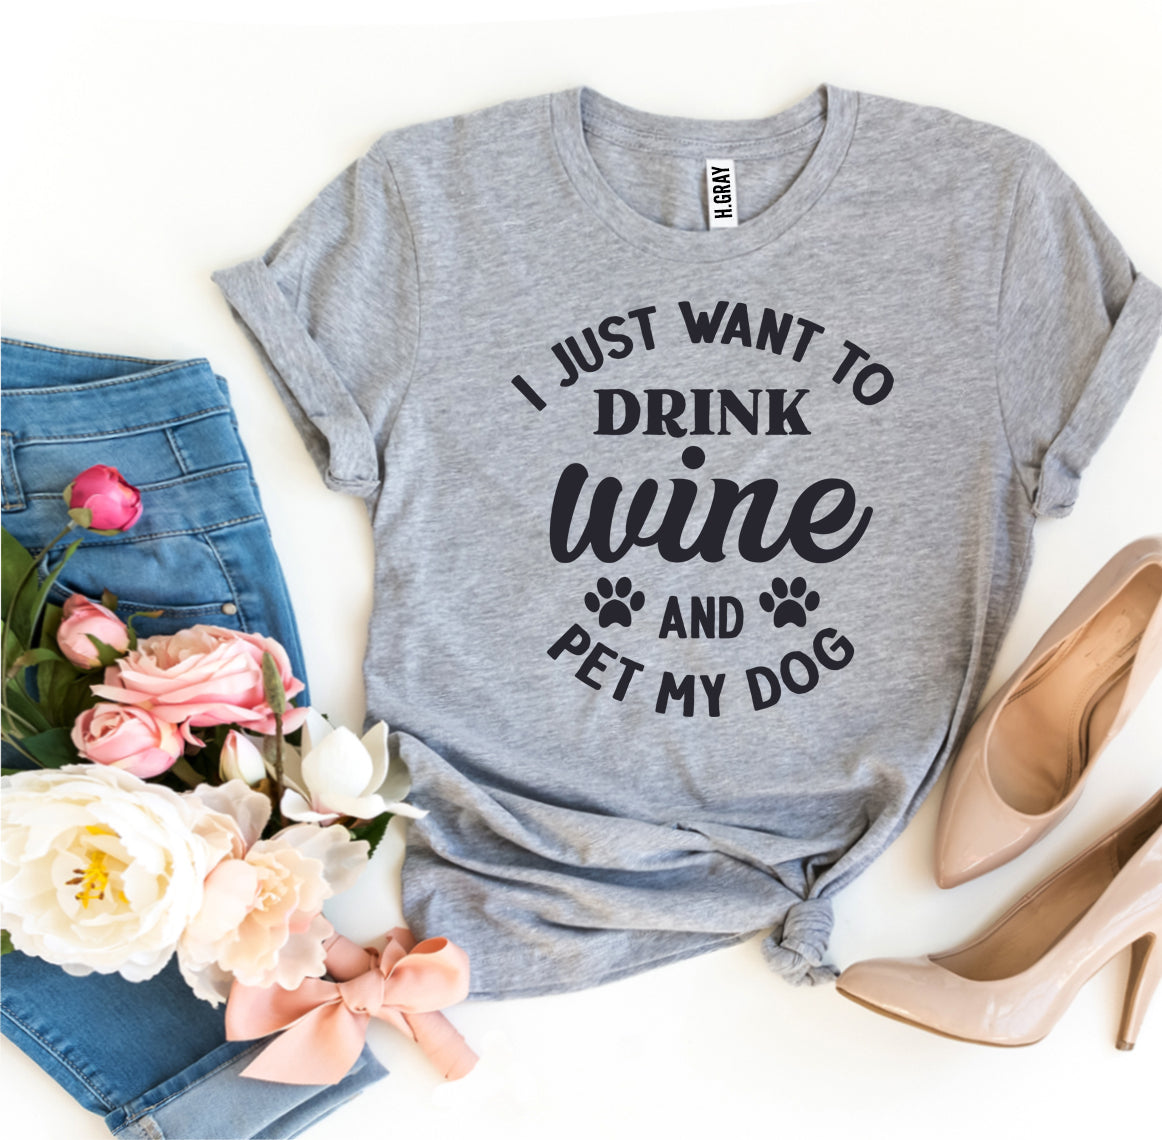 I Just Want To Drink Wine And Pet My Dog T-shirt